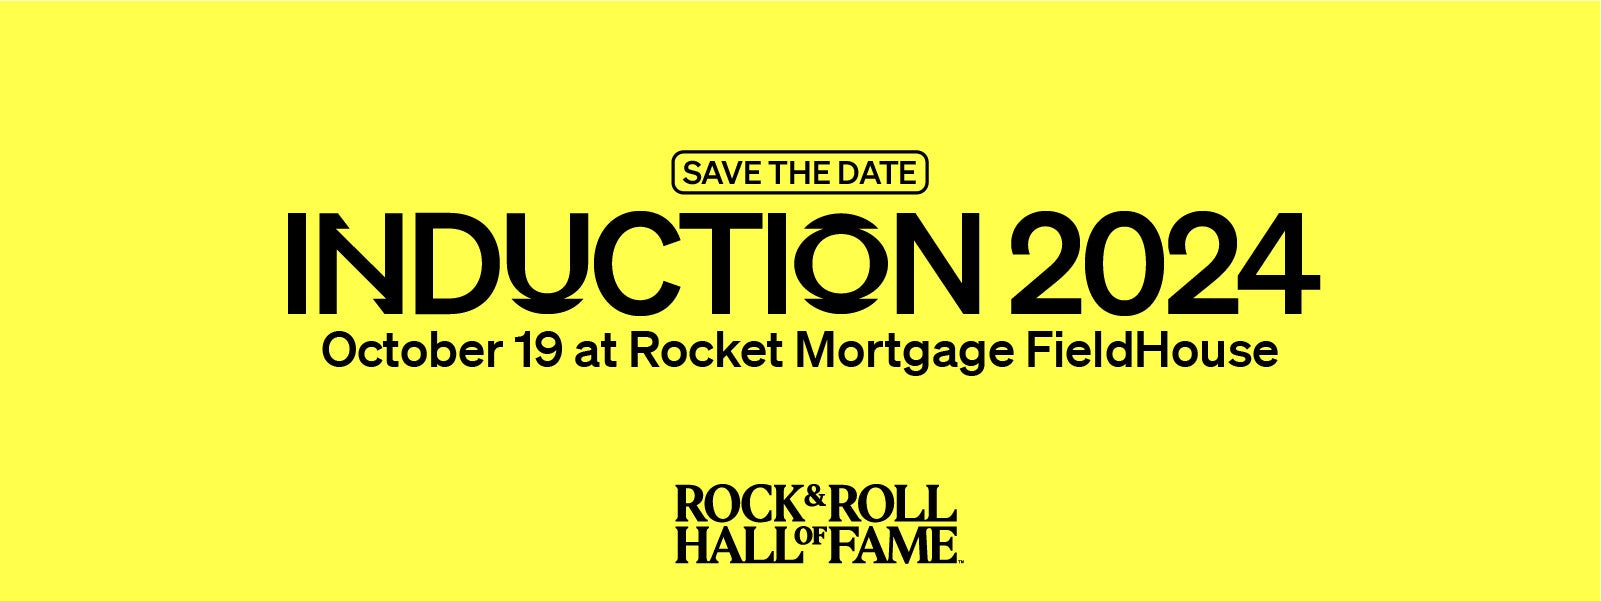 2024 Rock & Roll Hall of Fame Induction Ceremony